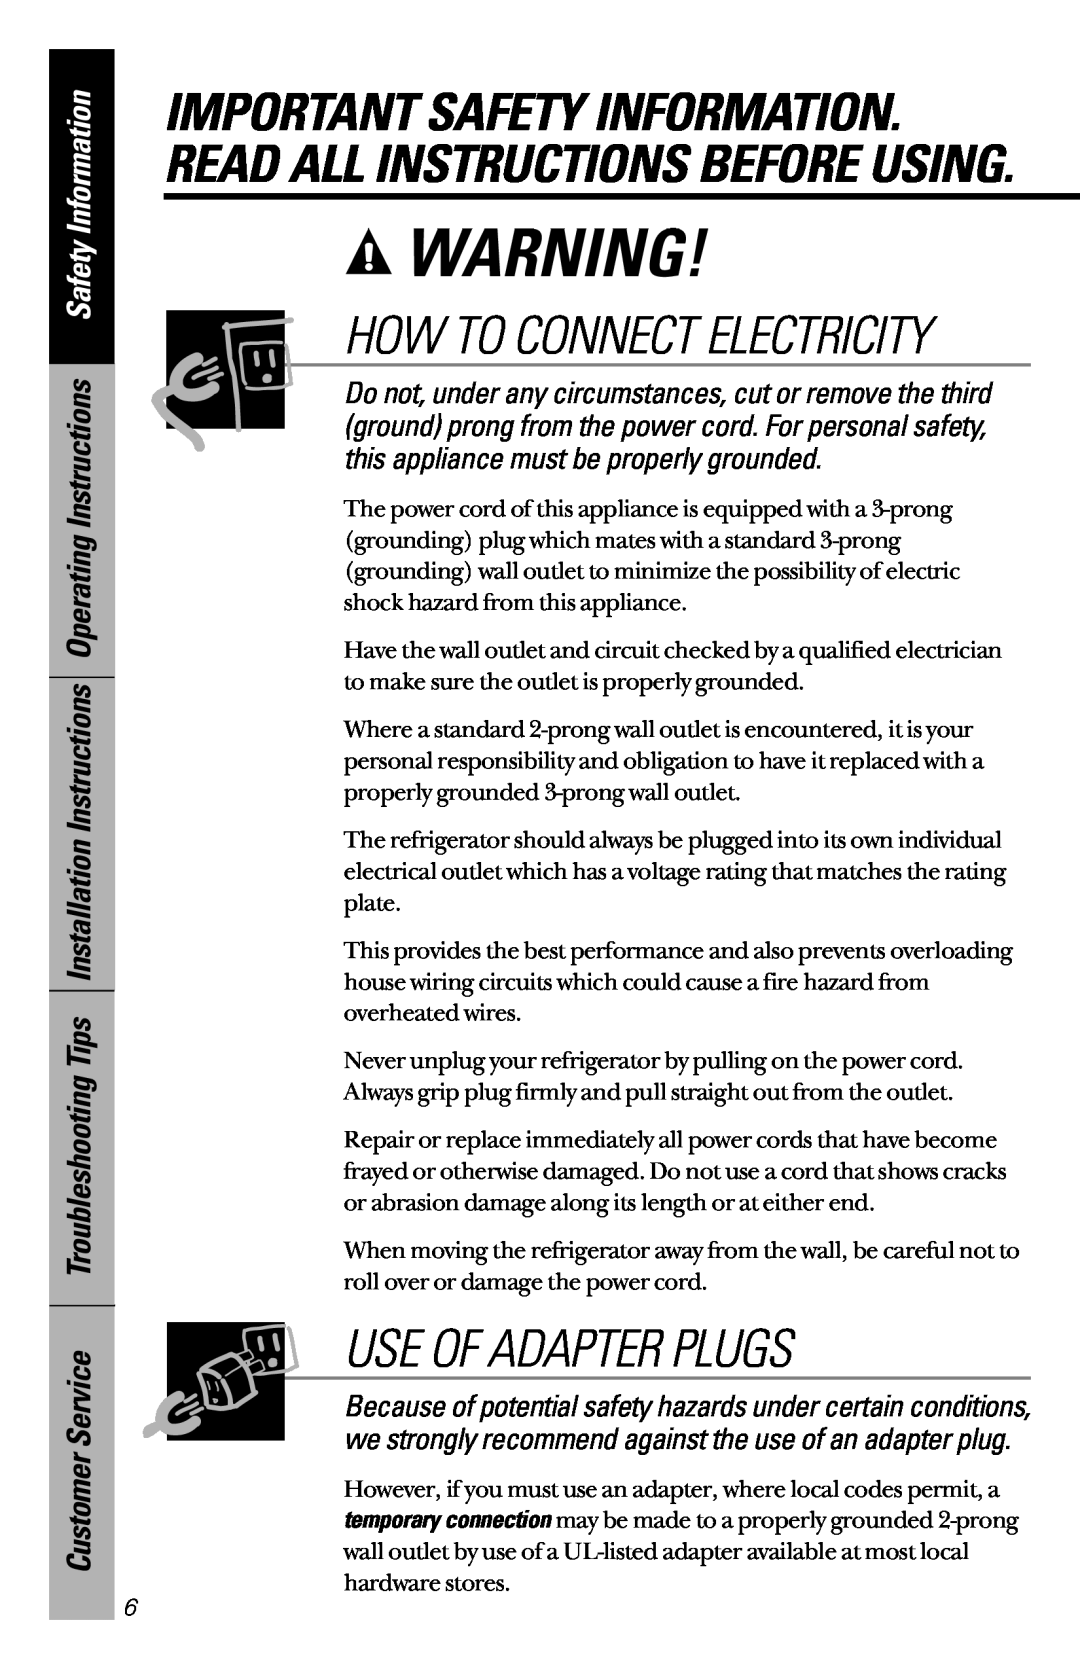 GE 28, 30 owner manual Use Of Adapter Plugs, How To Connect Electricity 